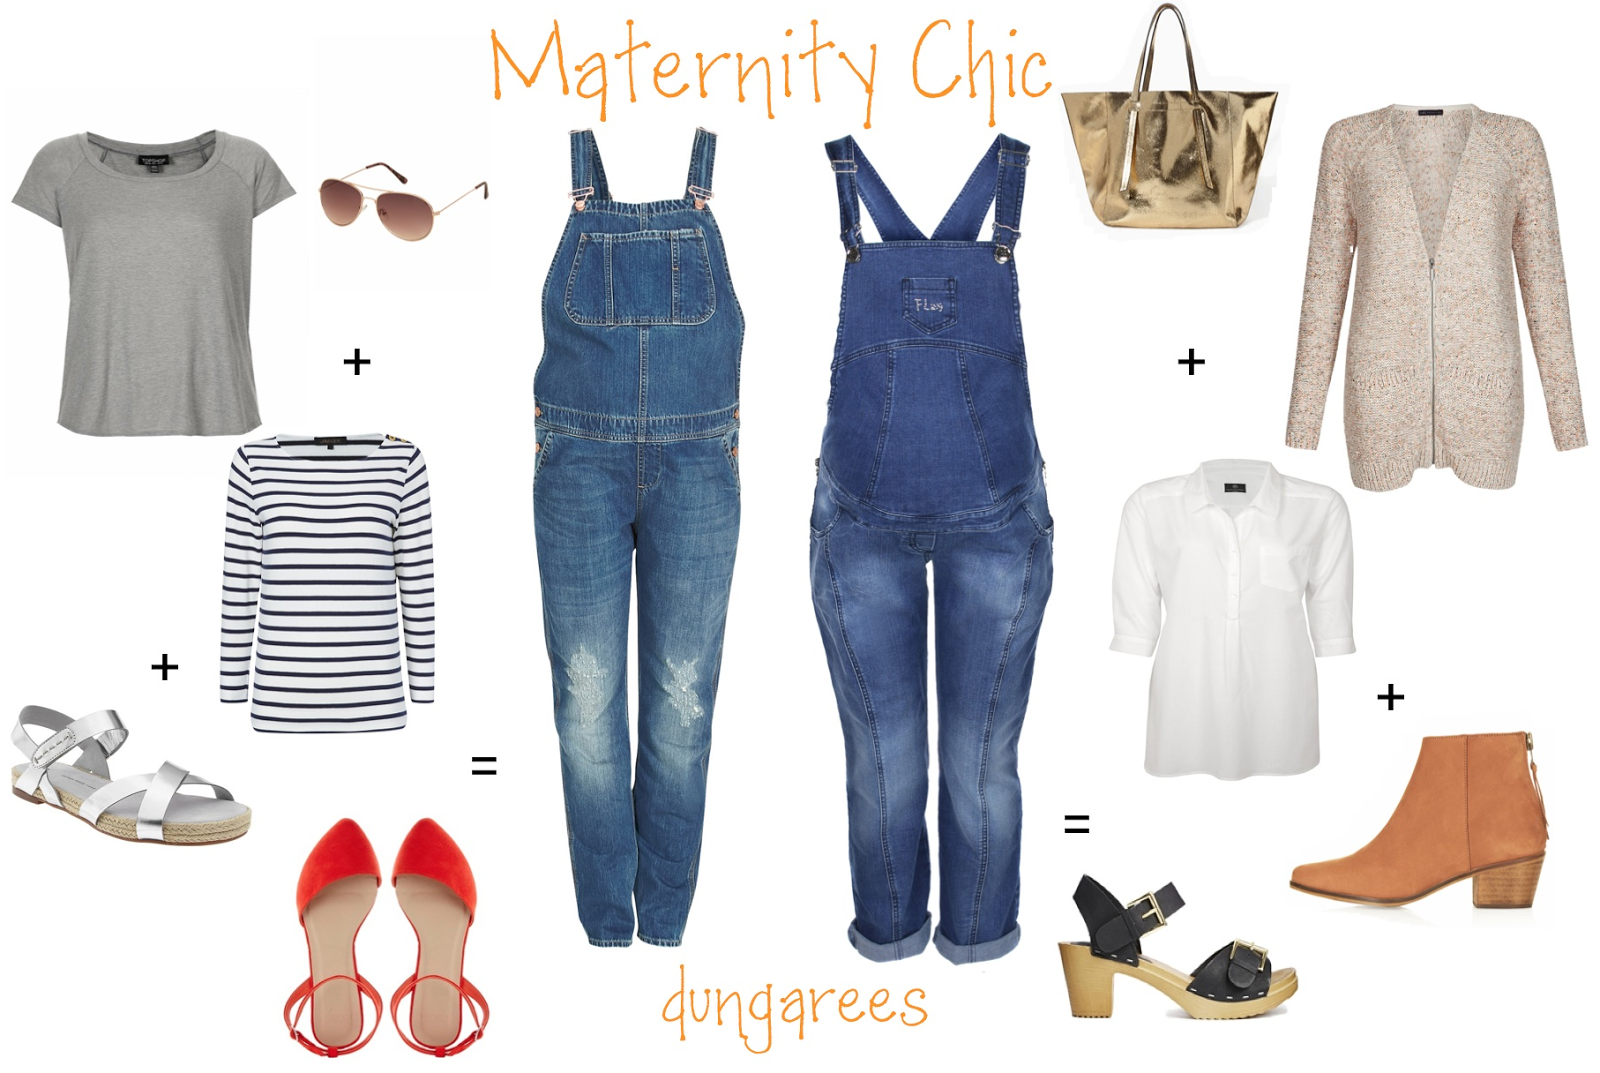 mamasVIB | V. I. BUYS: Bump, baby and beyond - the denim piece EVERY mama and VIB needs this Spring!, V. I. BUYS: Bump, baby and beyond - the denim piece EVERY mama and VIB needs this Spring! | maternity chic | dungarees | fashion | style | maternity chic | mama & papas | just maternity jeans | maternity dungarees | topshop | asks | gap | style | pregnancy | mamasVIB